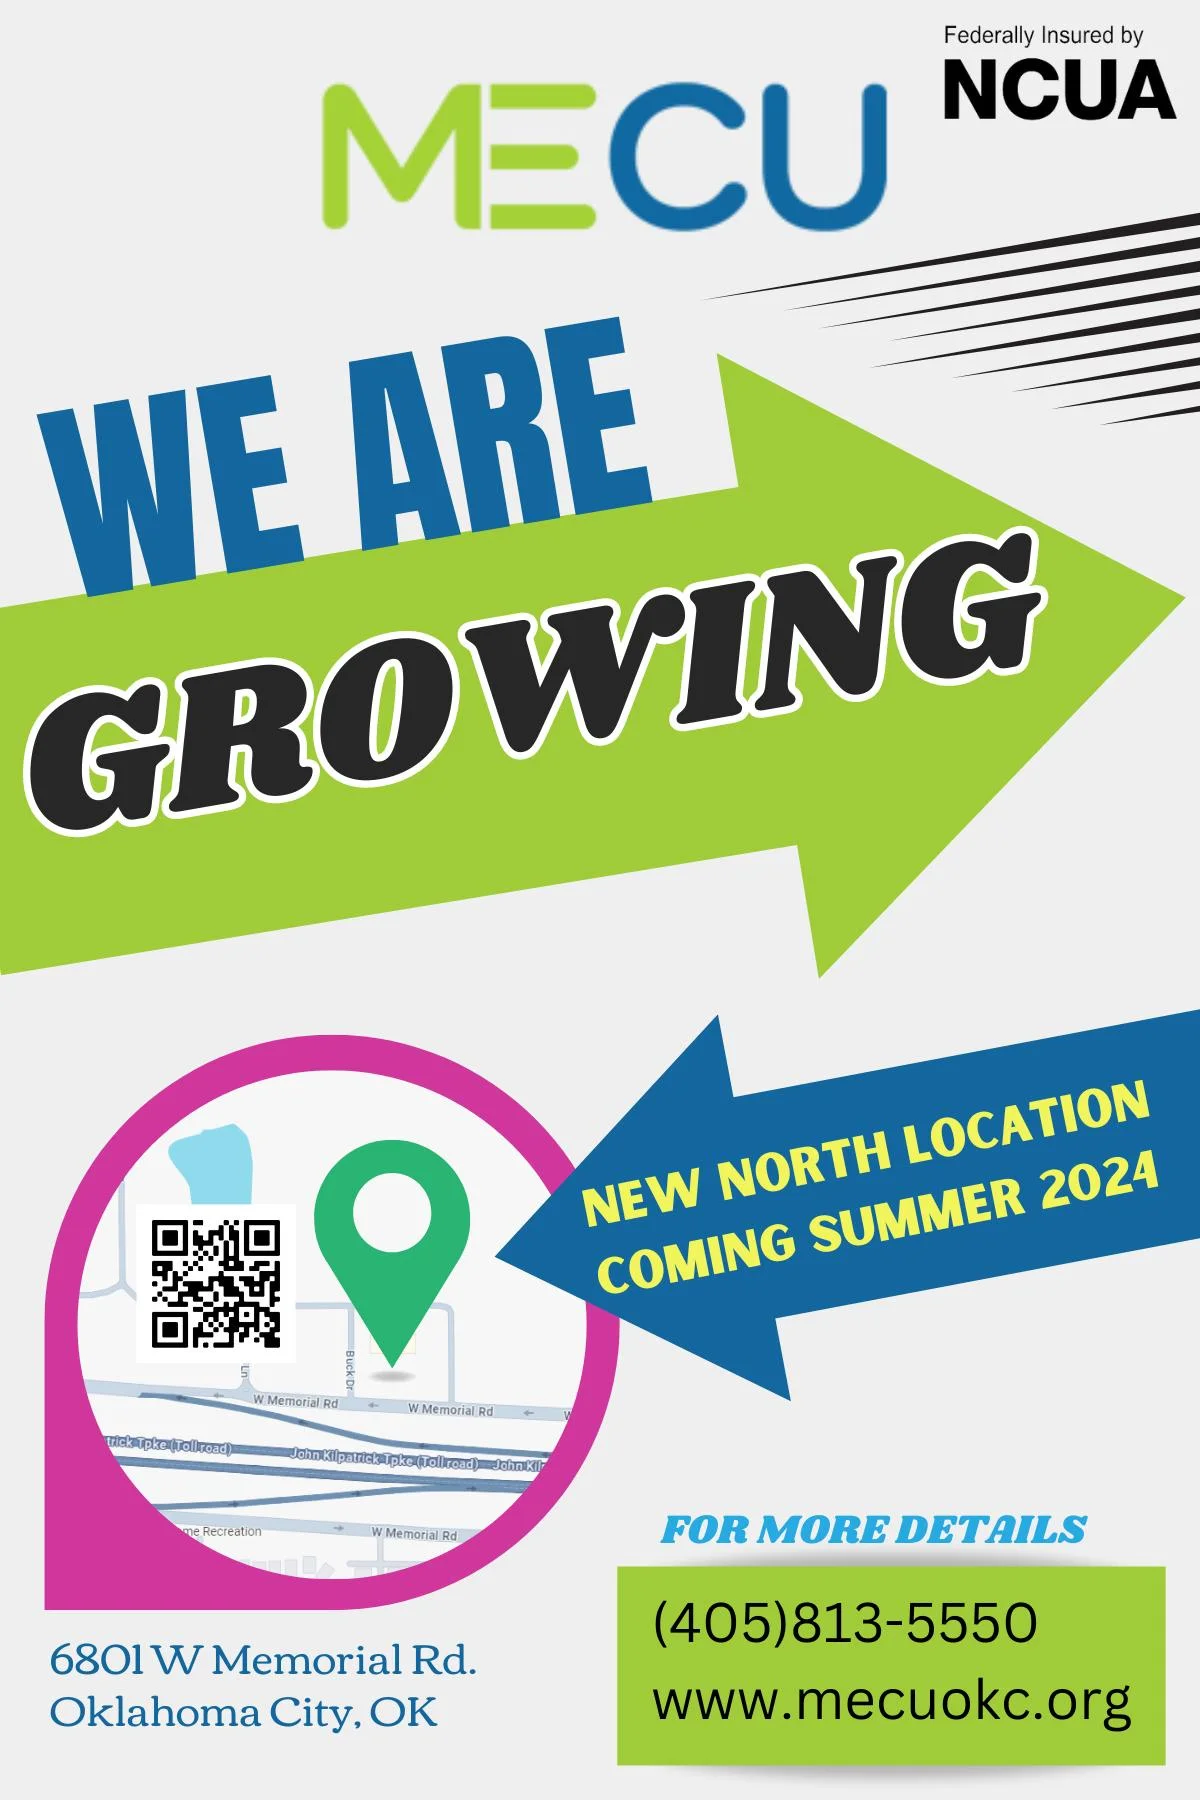 MECU We are growing new north location coming summer 2024 flyer